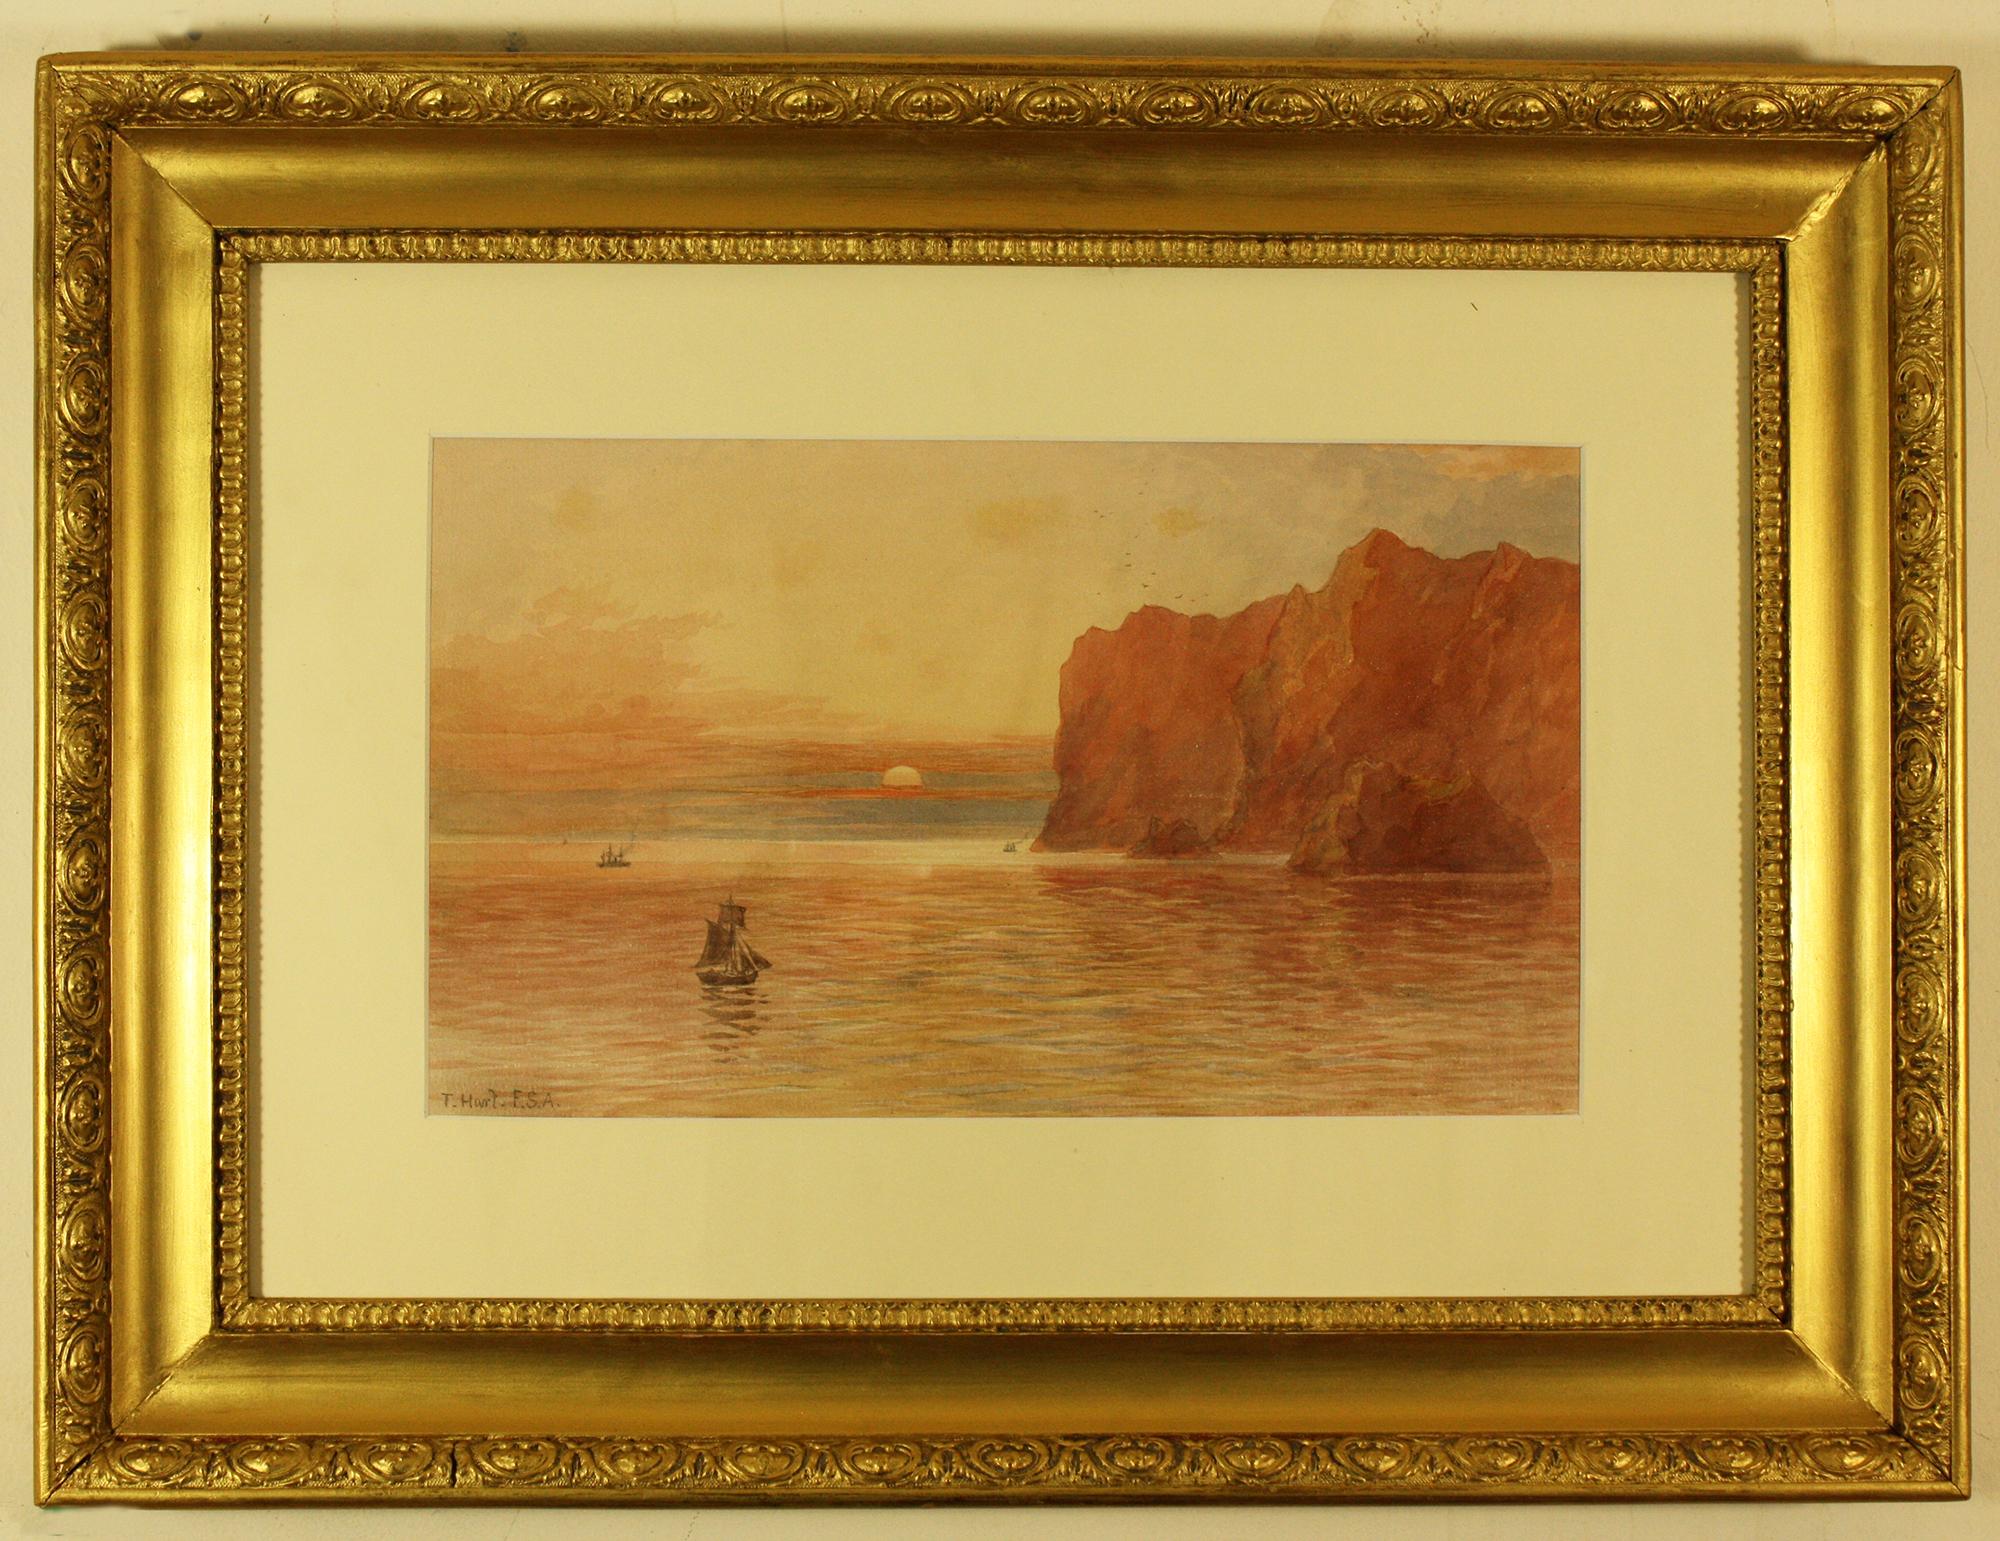 The Vro and Gull Rock, Mullion’by Thomas Hart F.S.A 
Original Frame New Mount and Glass
Image Size   8.5 ins by 14.5 ins
Thomas Hart 
Born 1830 Crowan Cornwall, Died 1916 The Lizard, Cornwall
Thomas was a prolific painter in watercolours and oil, he